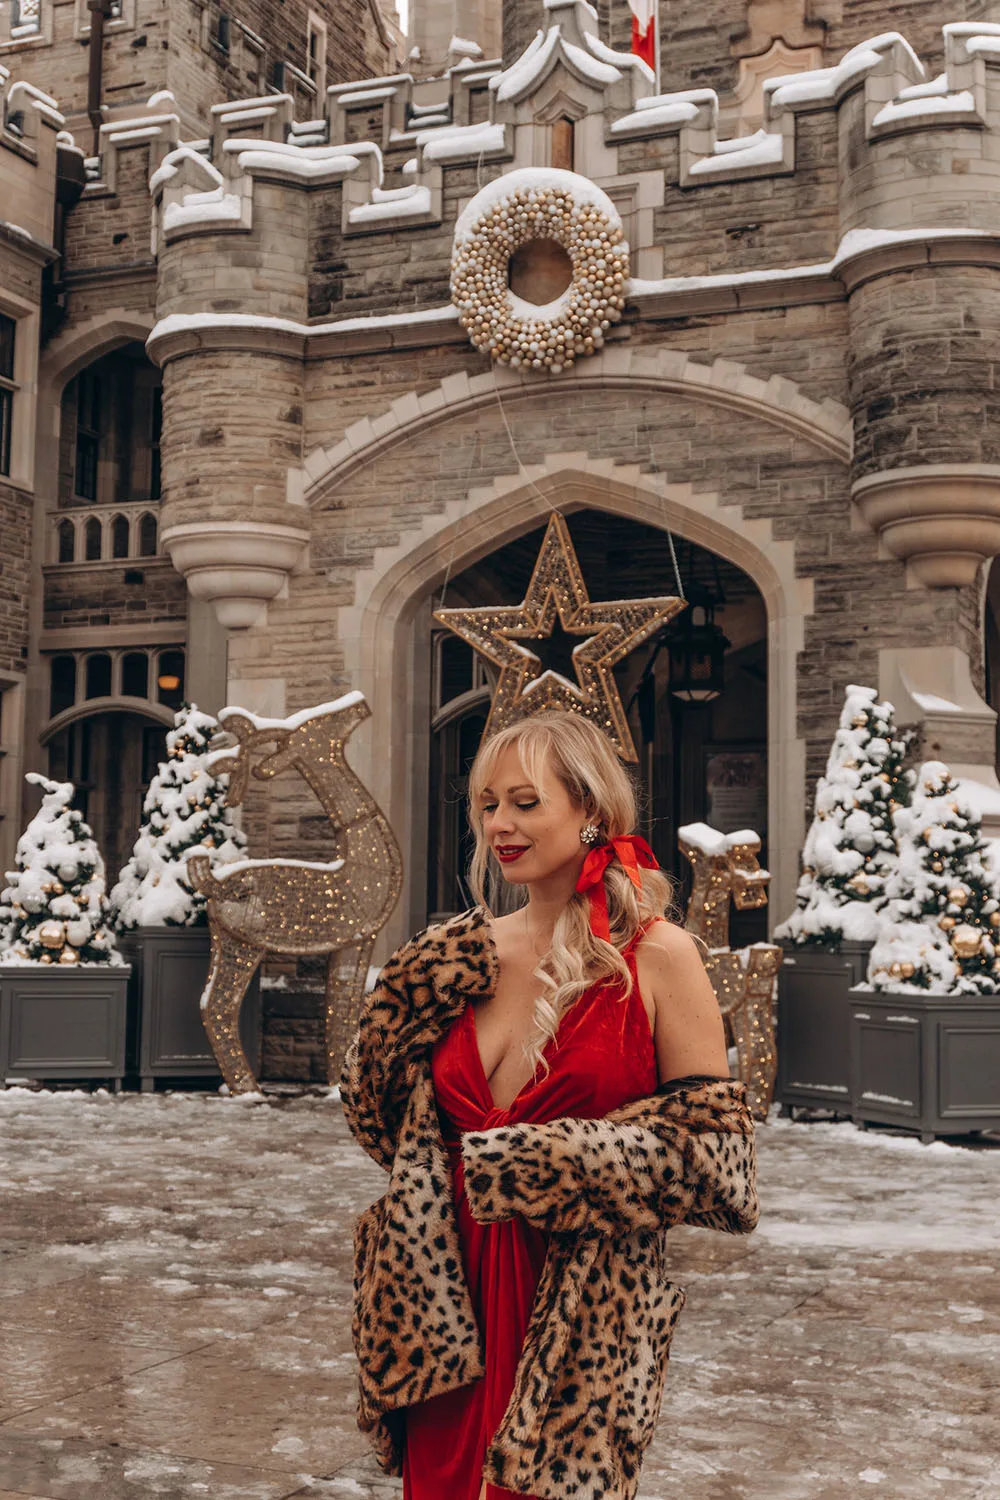 Looking for some fun things to do at Christmas in Toronto this holiday season? This guide is for you! Toronto has so many incredibly fun & festive activities to do during the Christmas season. From festive pop up bars to family friendly fun, this guide has you covered to get the most out of the Christmas season in Toronto! Pictured here: Casa Loma's Holiday Lights Tour